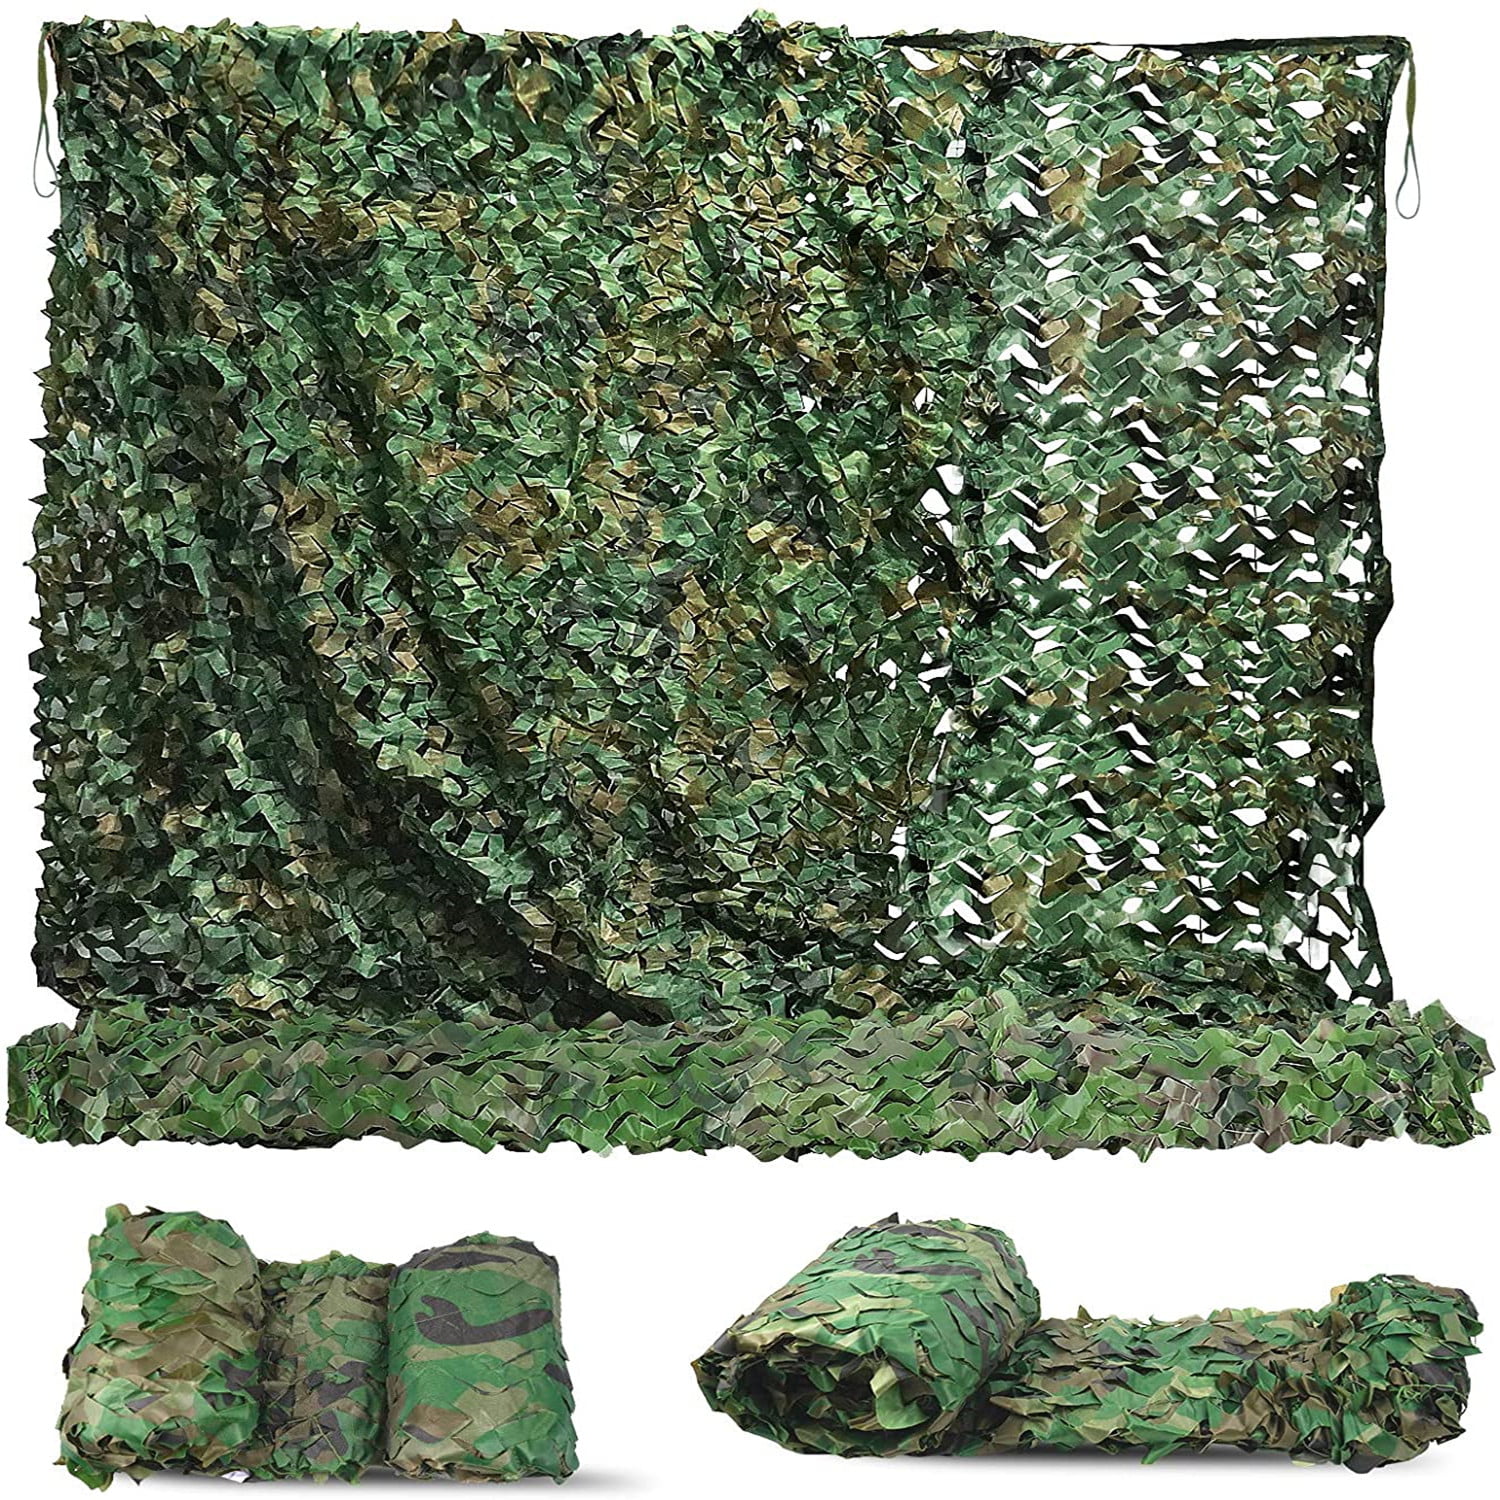 6.6 x10FT Camouflage Camo Army Green Net Netting Shade Woodland Military Hunting 